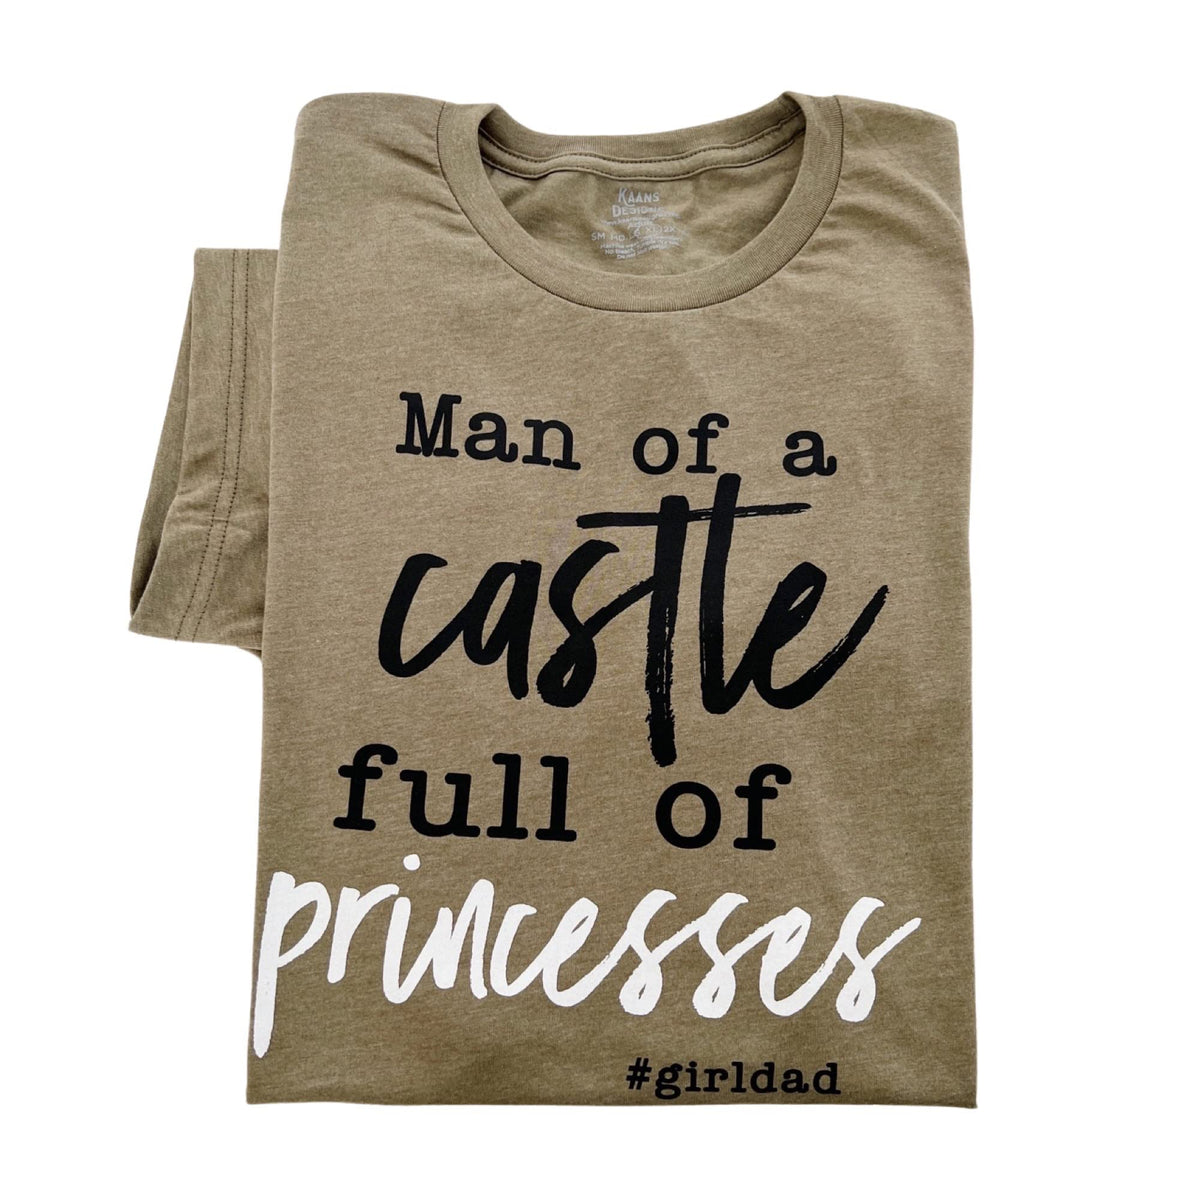 Girl Daddaddys Girl Adult Shirt Man Of A Castle Full Of Princesses Kaans Designs 8643